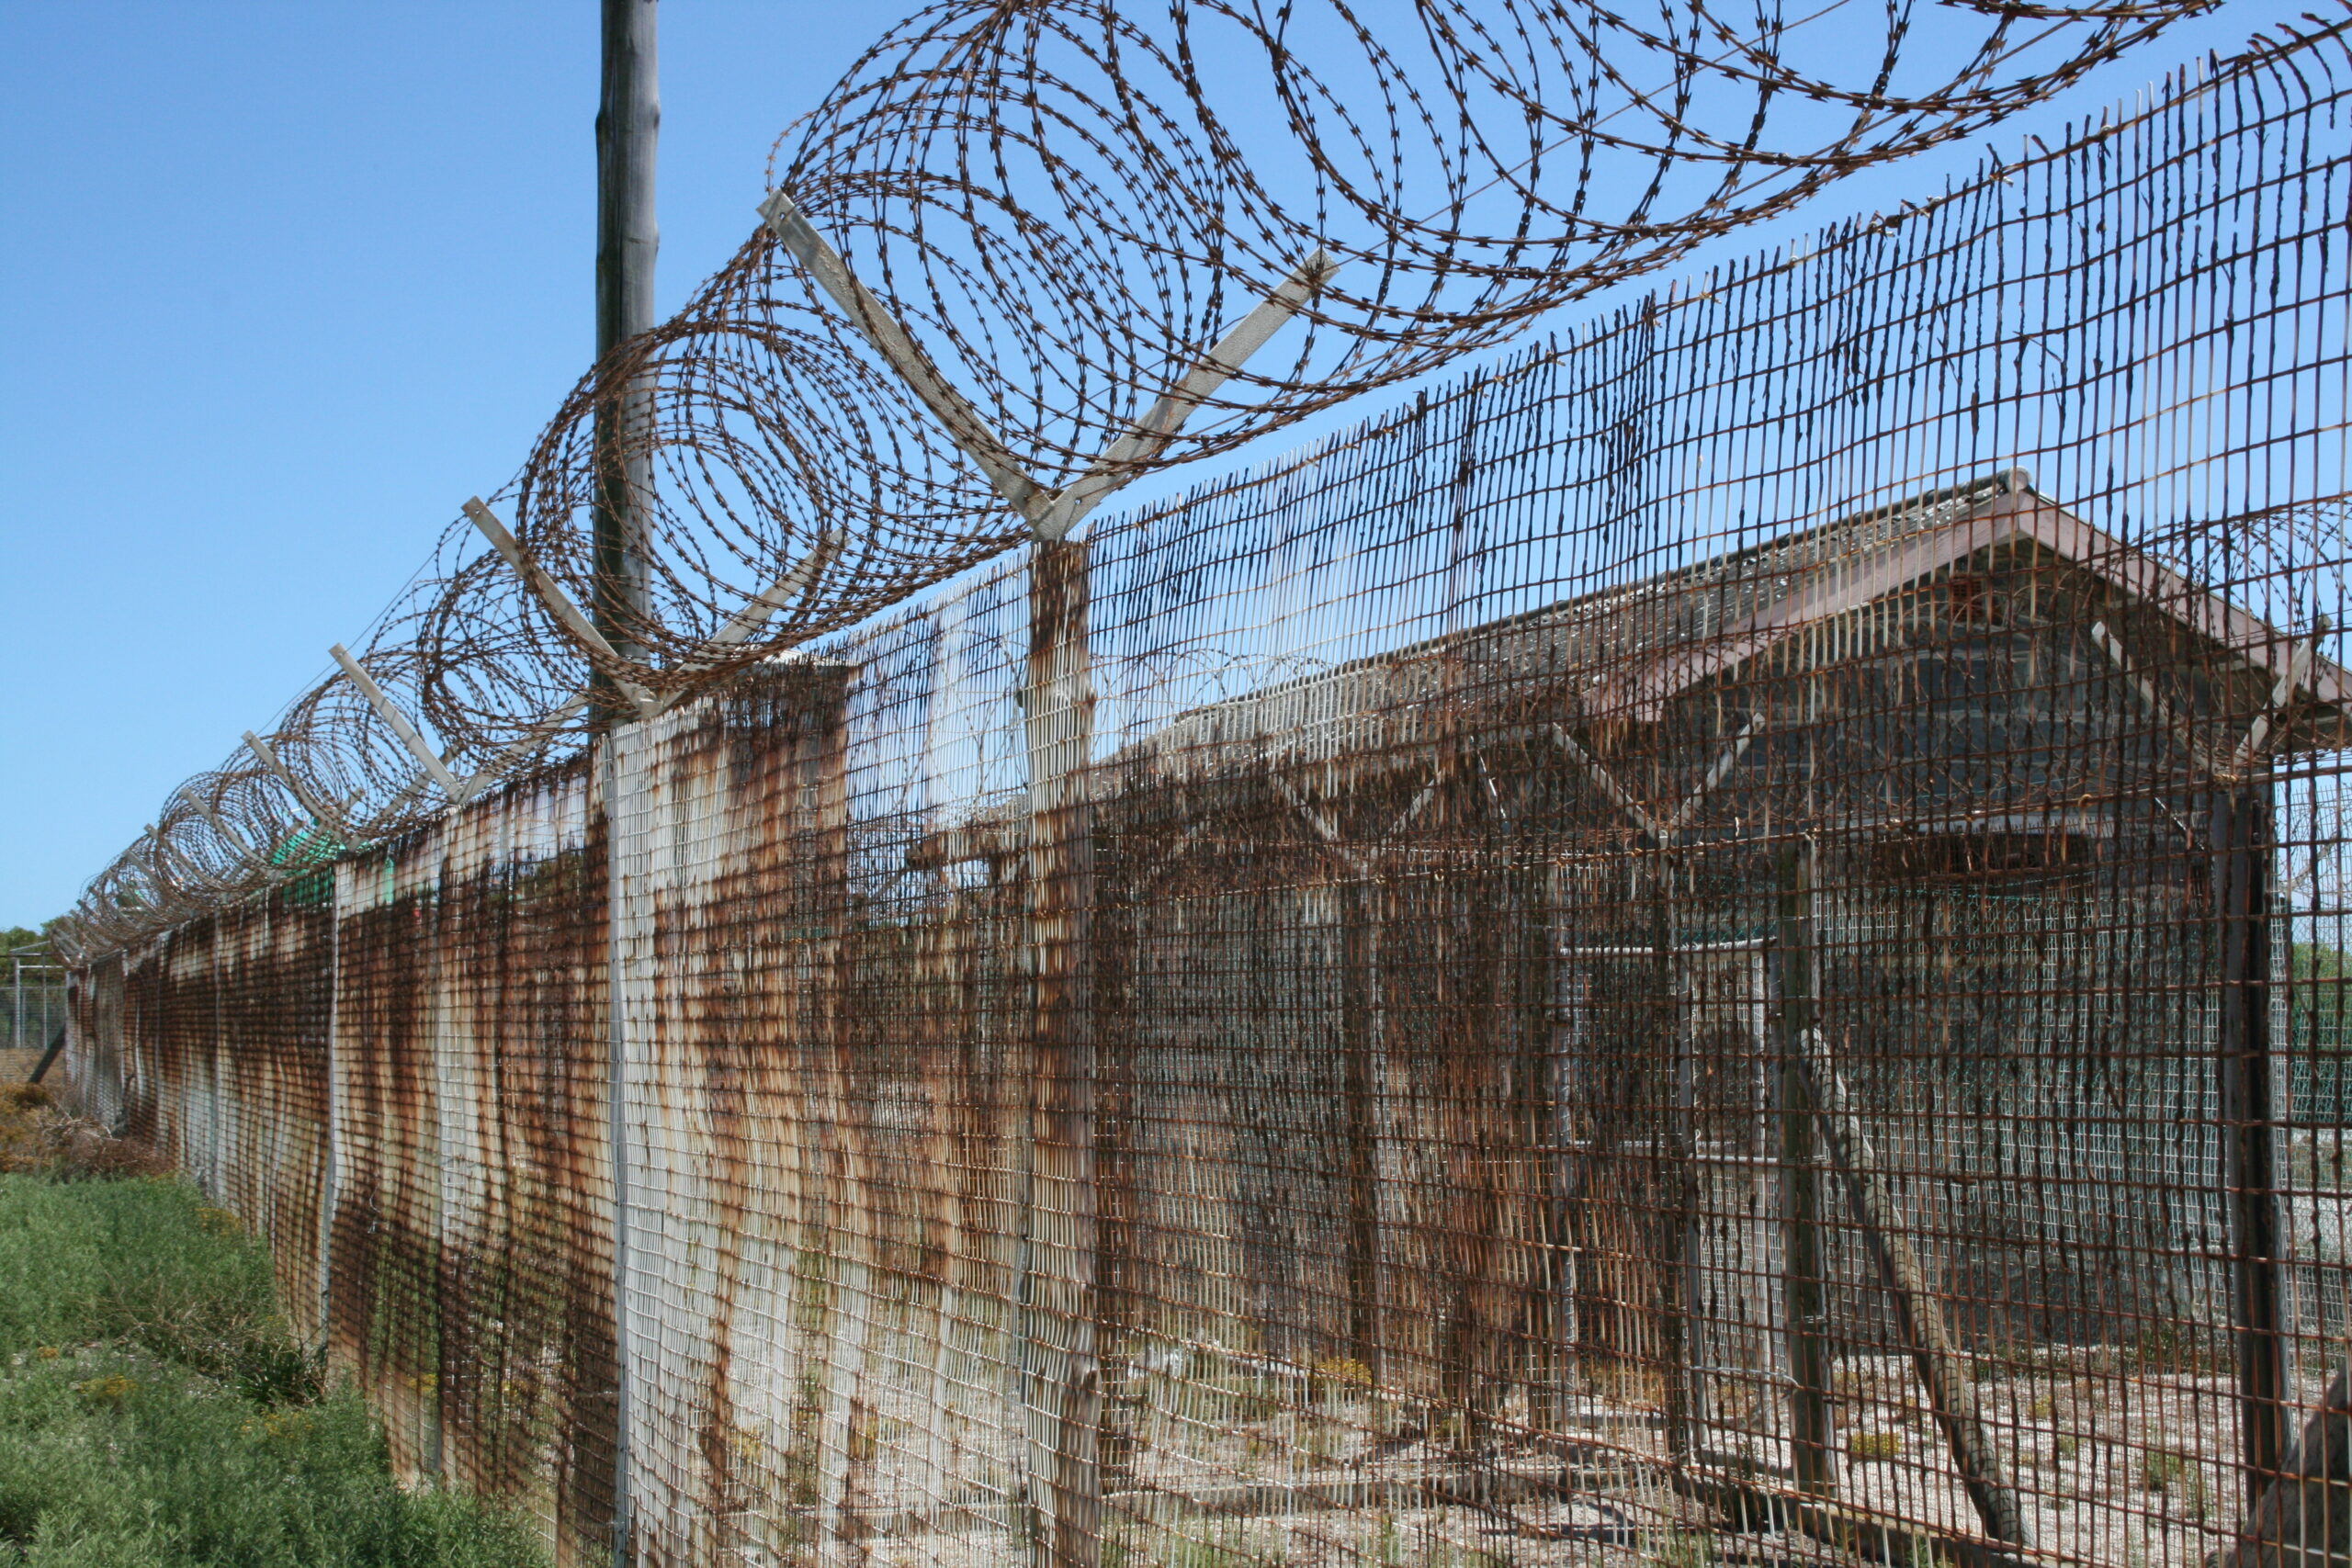 A barbed wire fence guards the prison on Robben Island near Cape Town, South Africa.